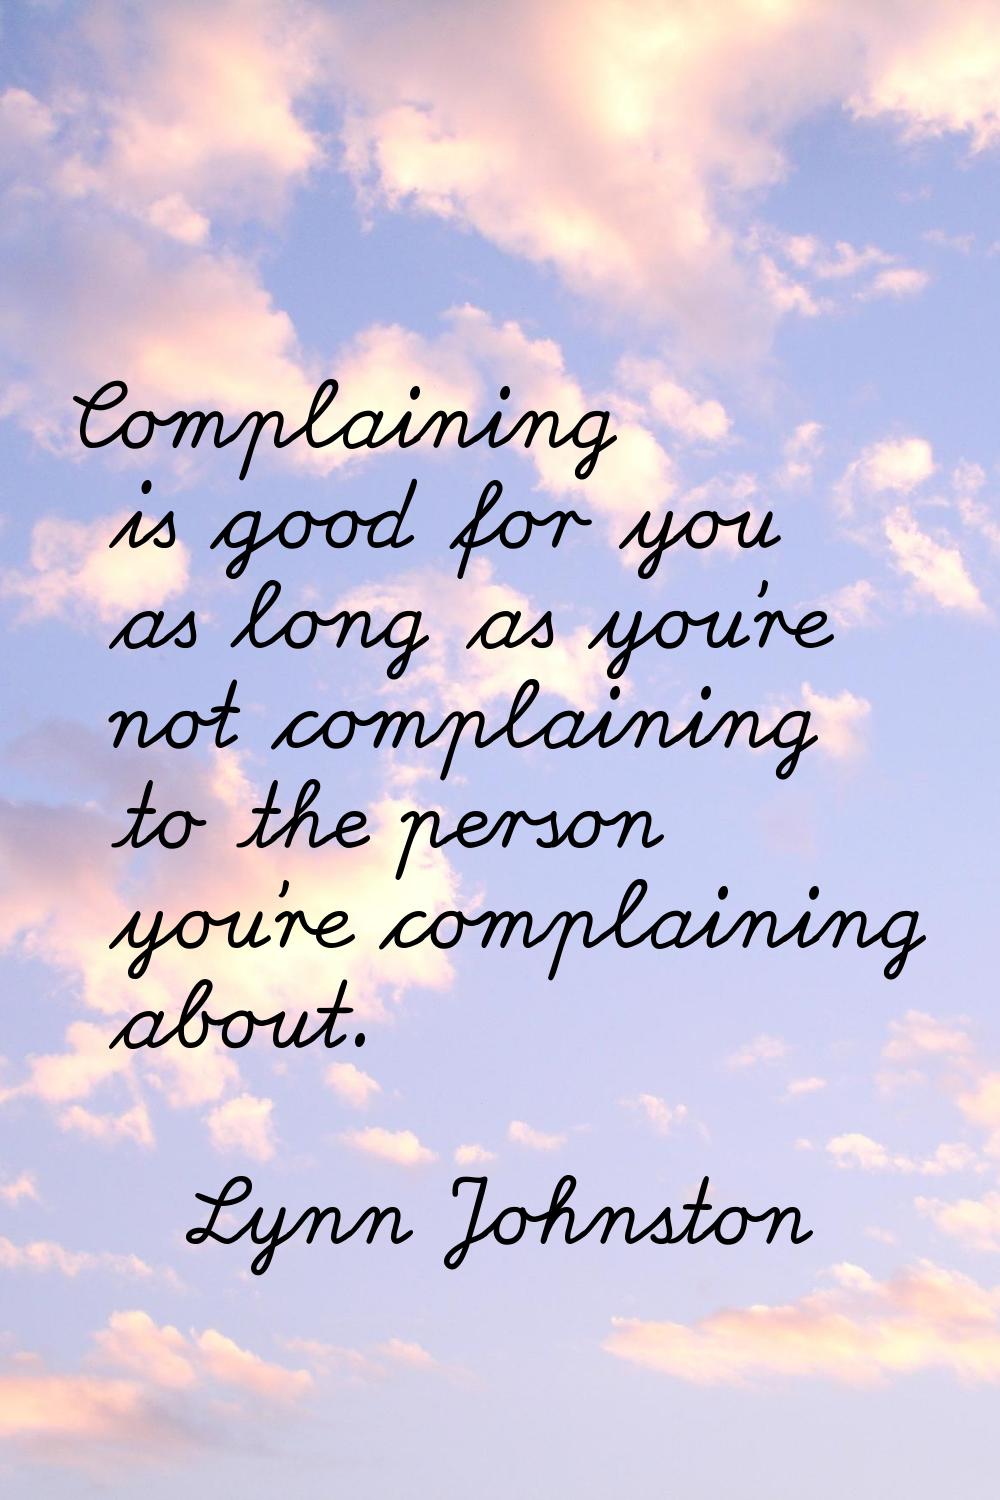 Complaining is good for you as long as you're not complaining to the person you're complaining abou